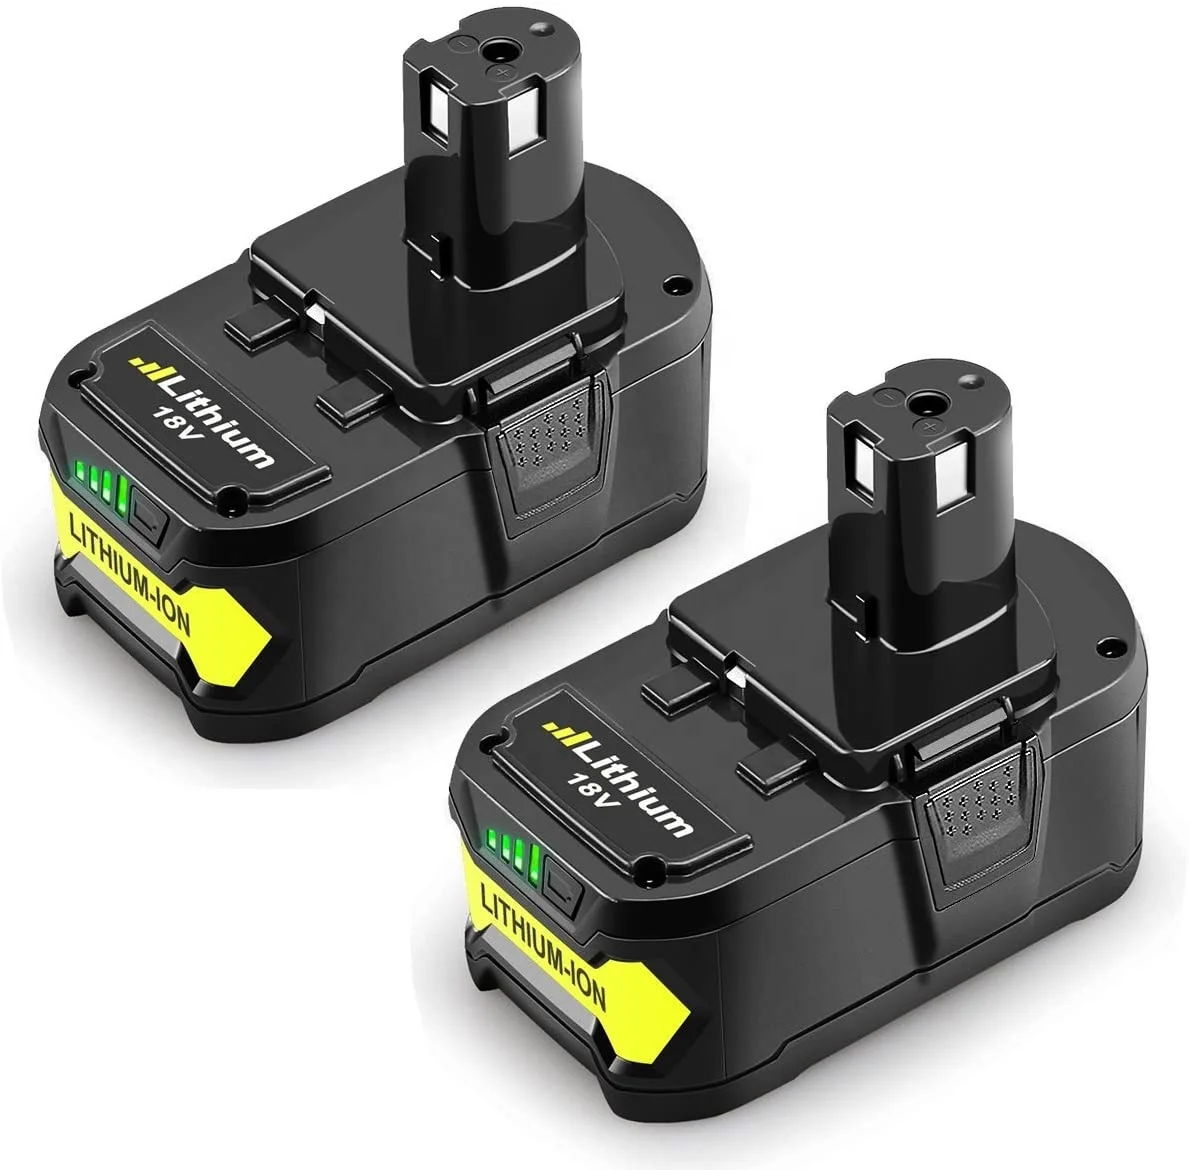 Rechargeable battery Compatible with Ryobi 18v lithium battery 5000mah P108 P107 P104 Cordless tools battery Combo Tools Kits